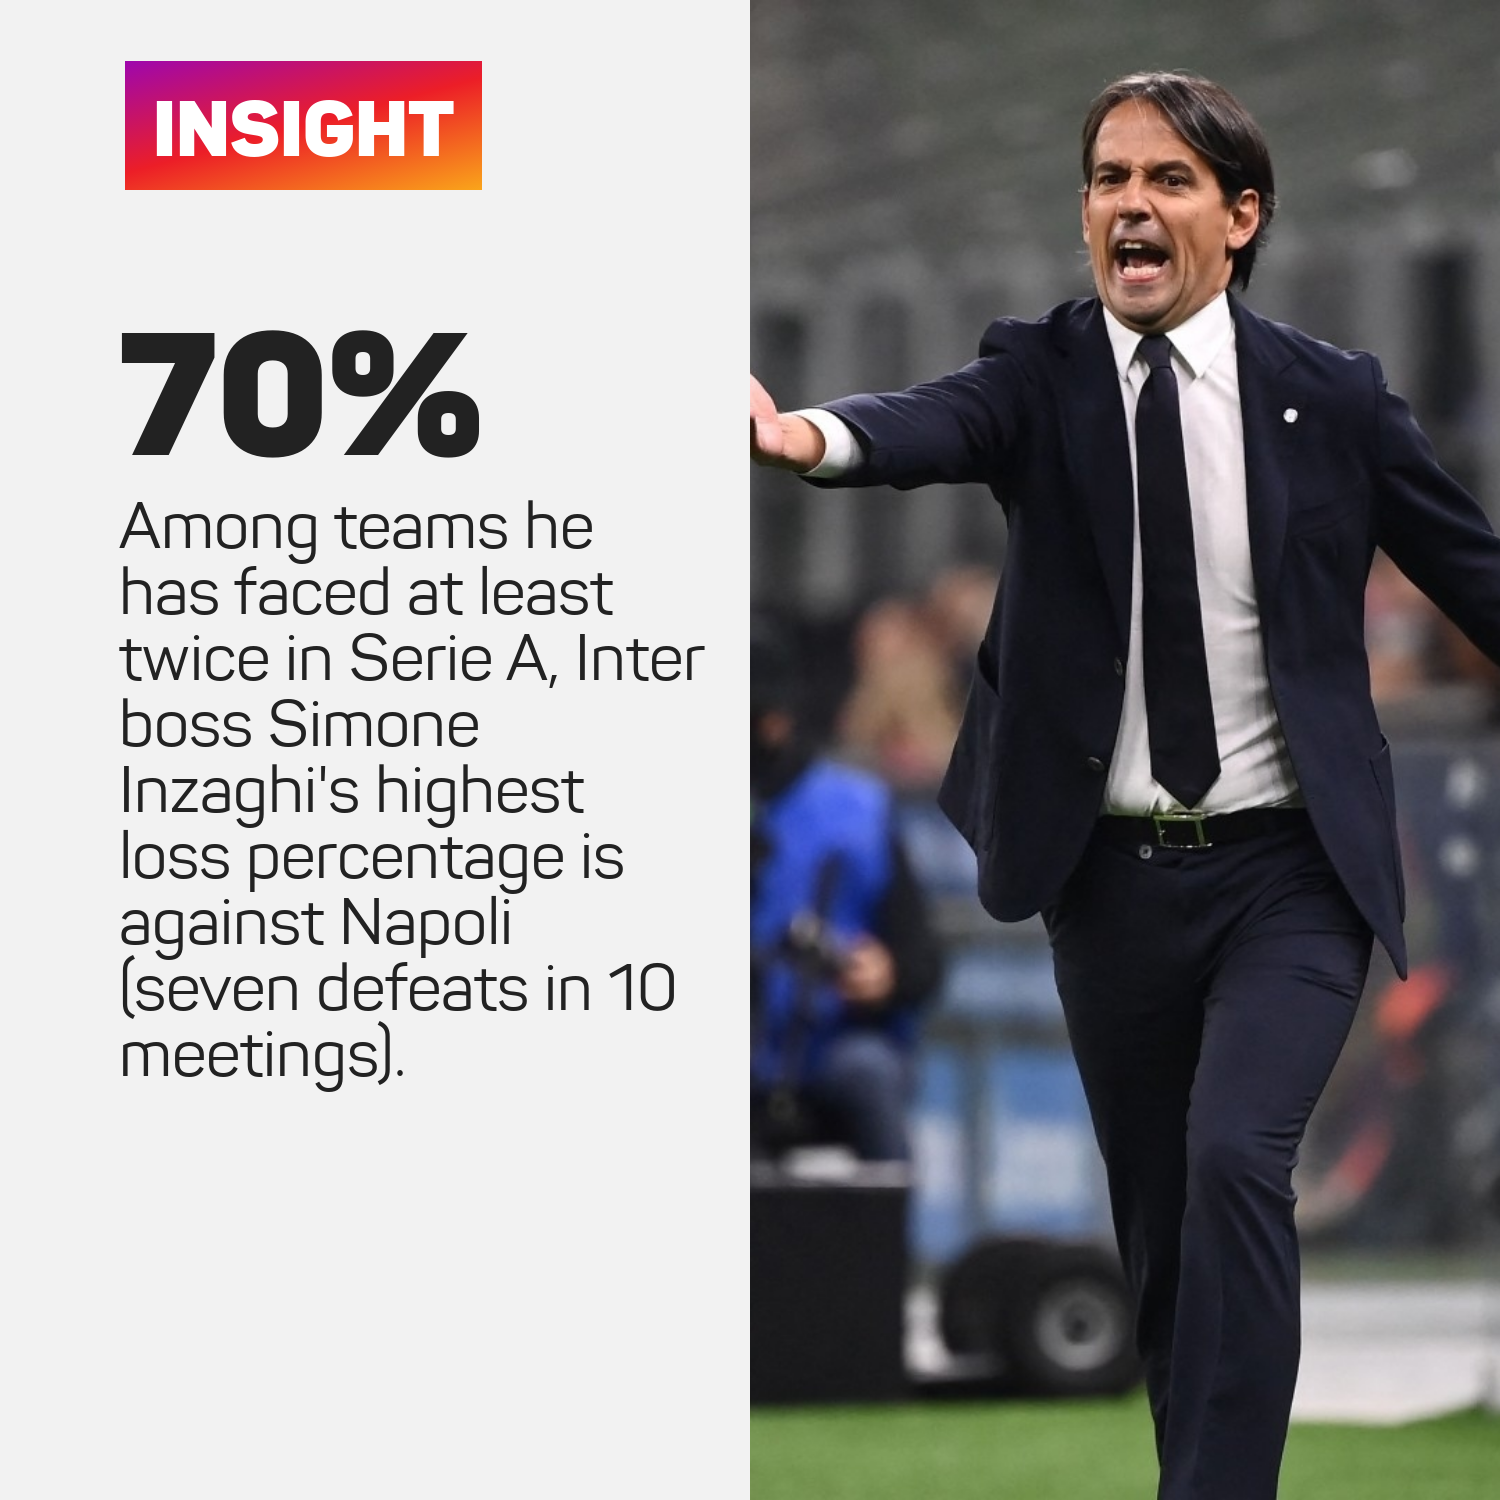 Simone Inzaghi has lost 70 per cent of his matches against Napoli